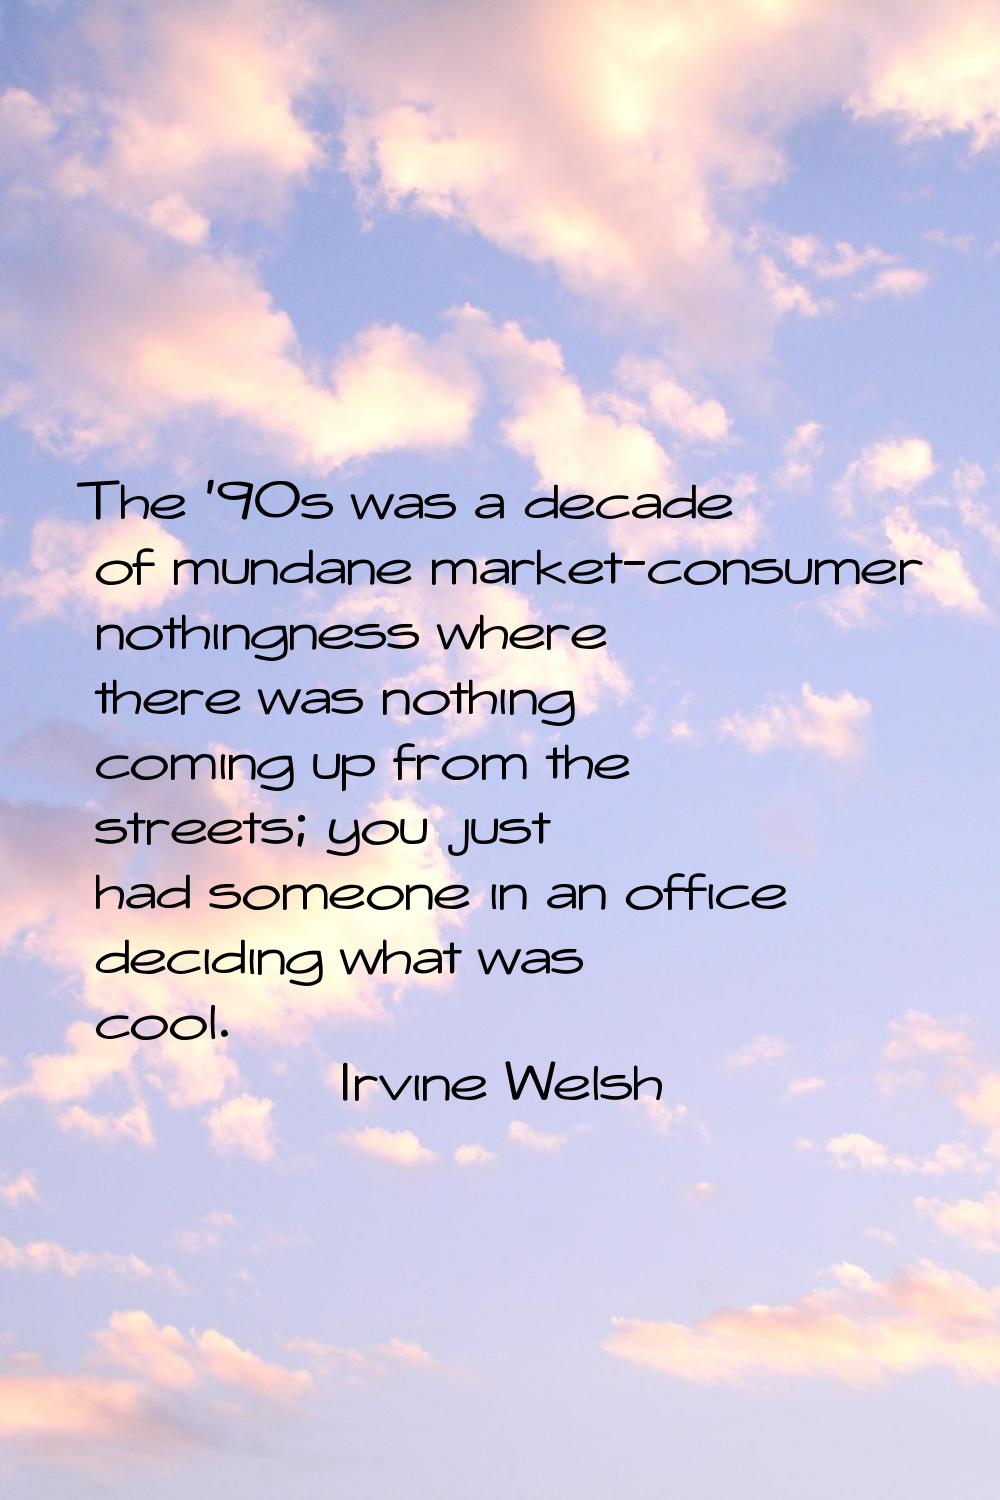 The '90s was a decade of mundane market-consumer nothingness where there was nothing coming up from